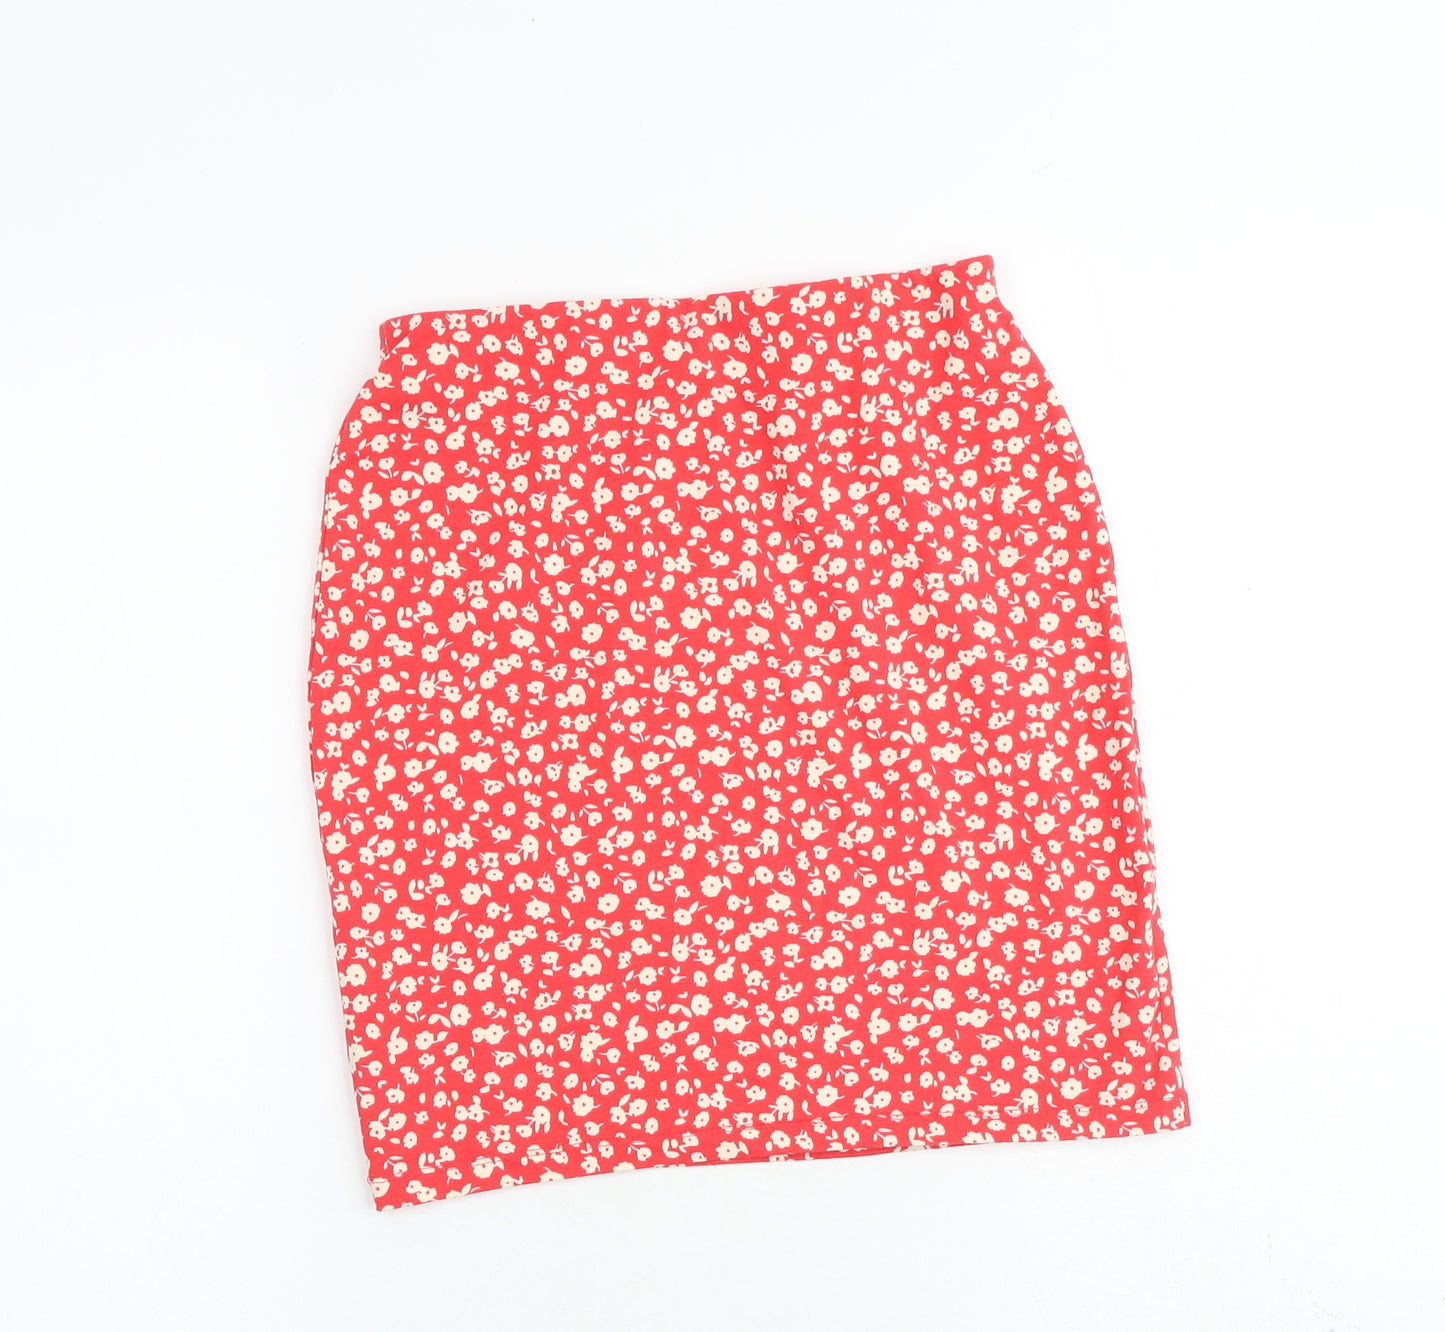 New Look Womens Red Floral Cotton A-Line Skirt Size 8